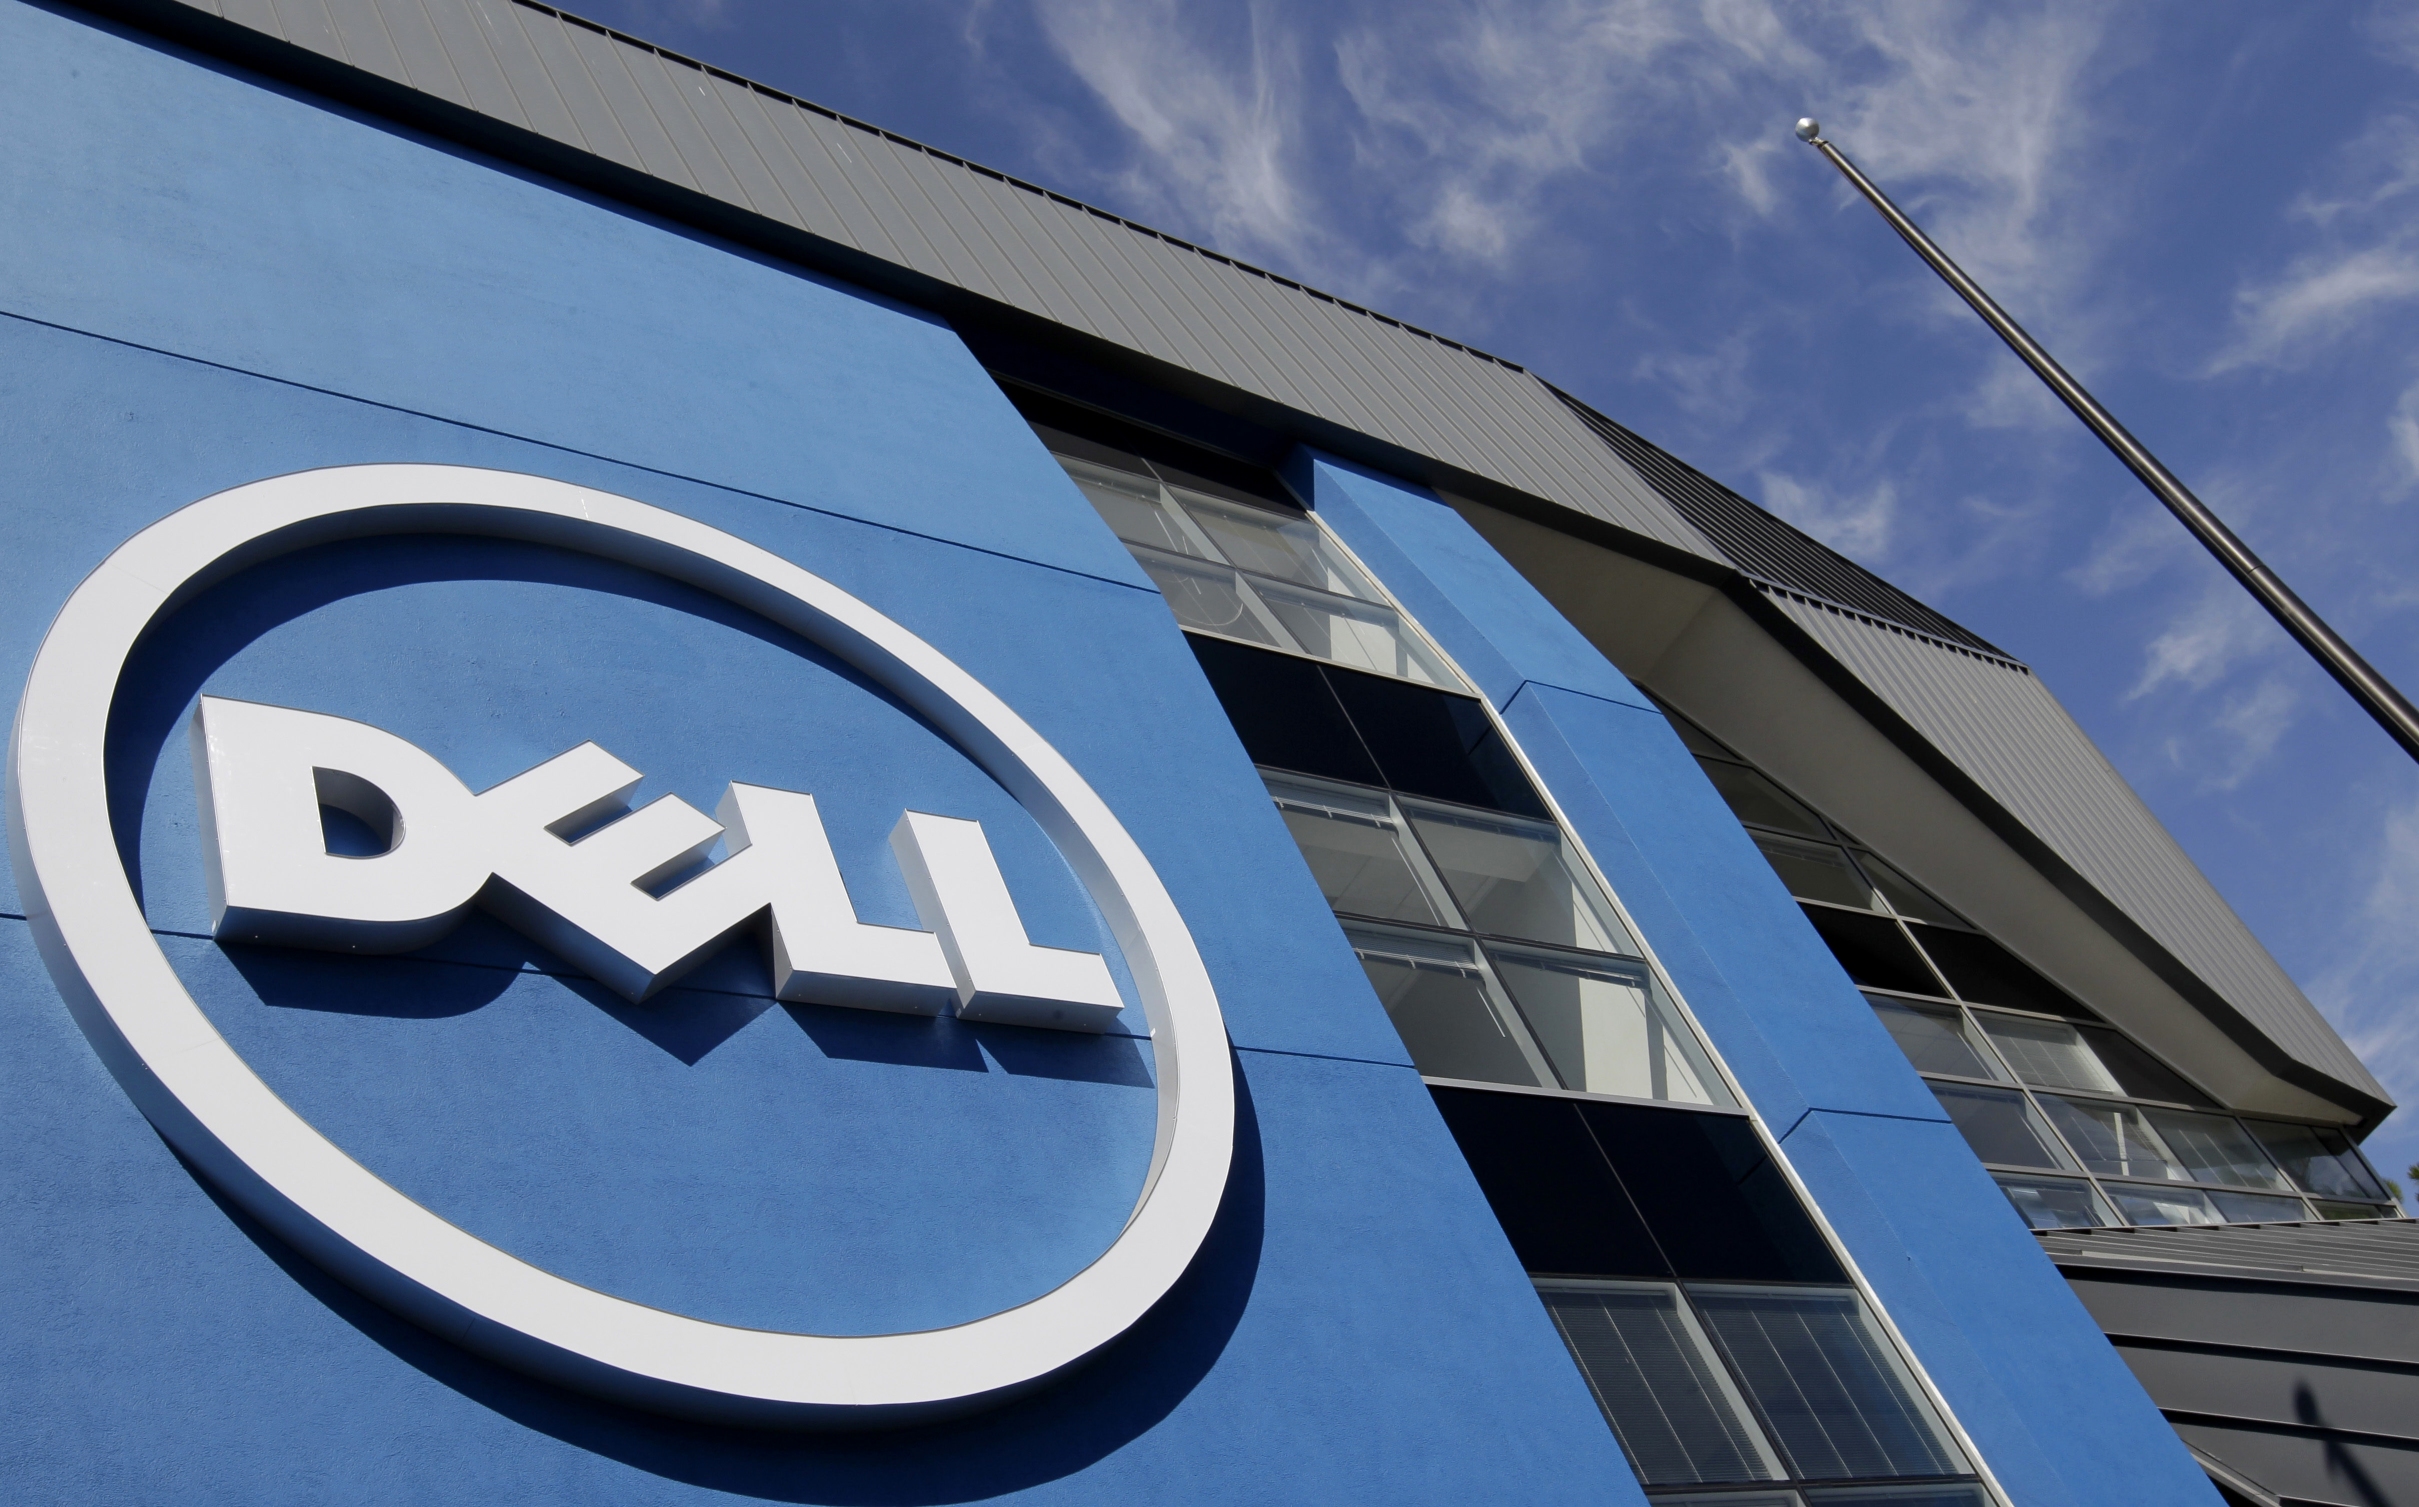 Dell shareholders vote on Thursday whether to approve the privatisation bid for the world’s third biggest computer maker. Photo: AP